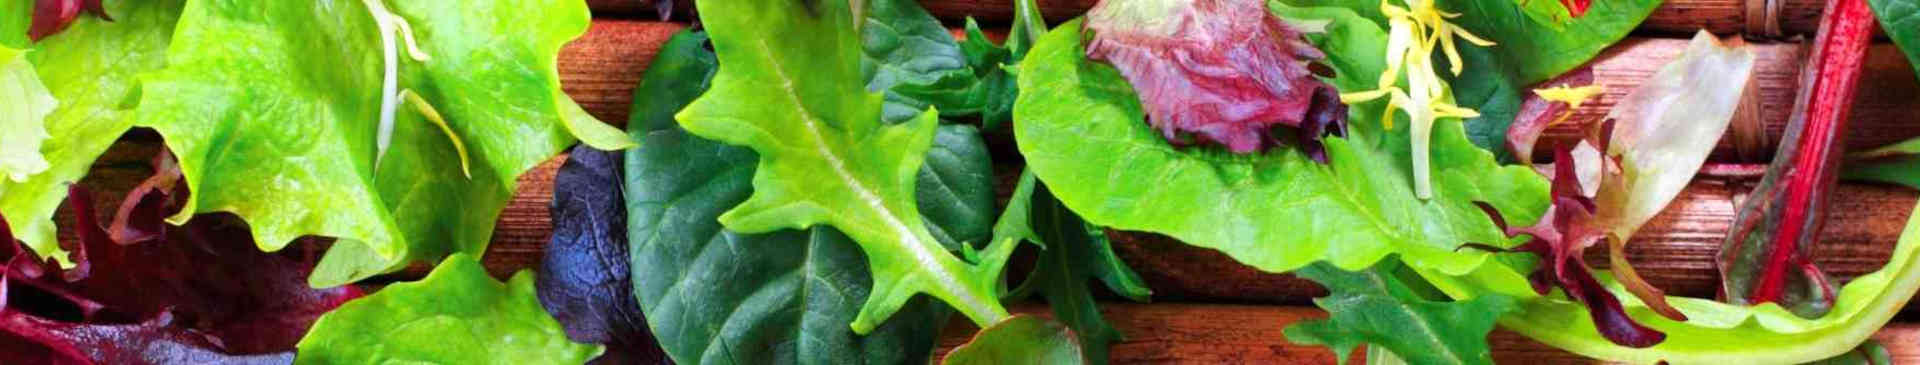 Growing Baby Leaf to Add Interest to Your Table